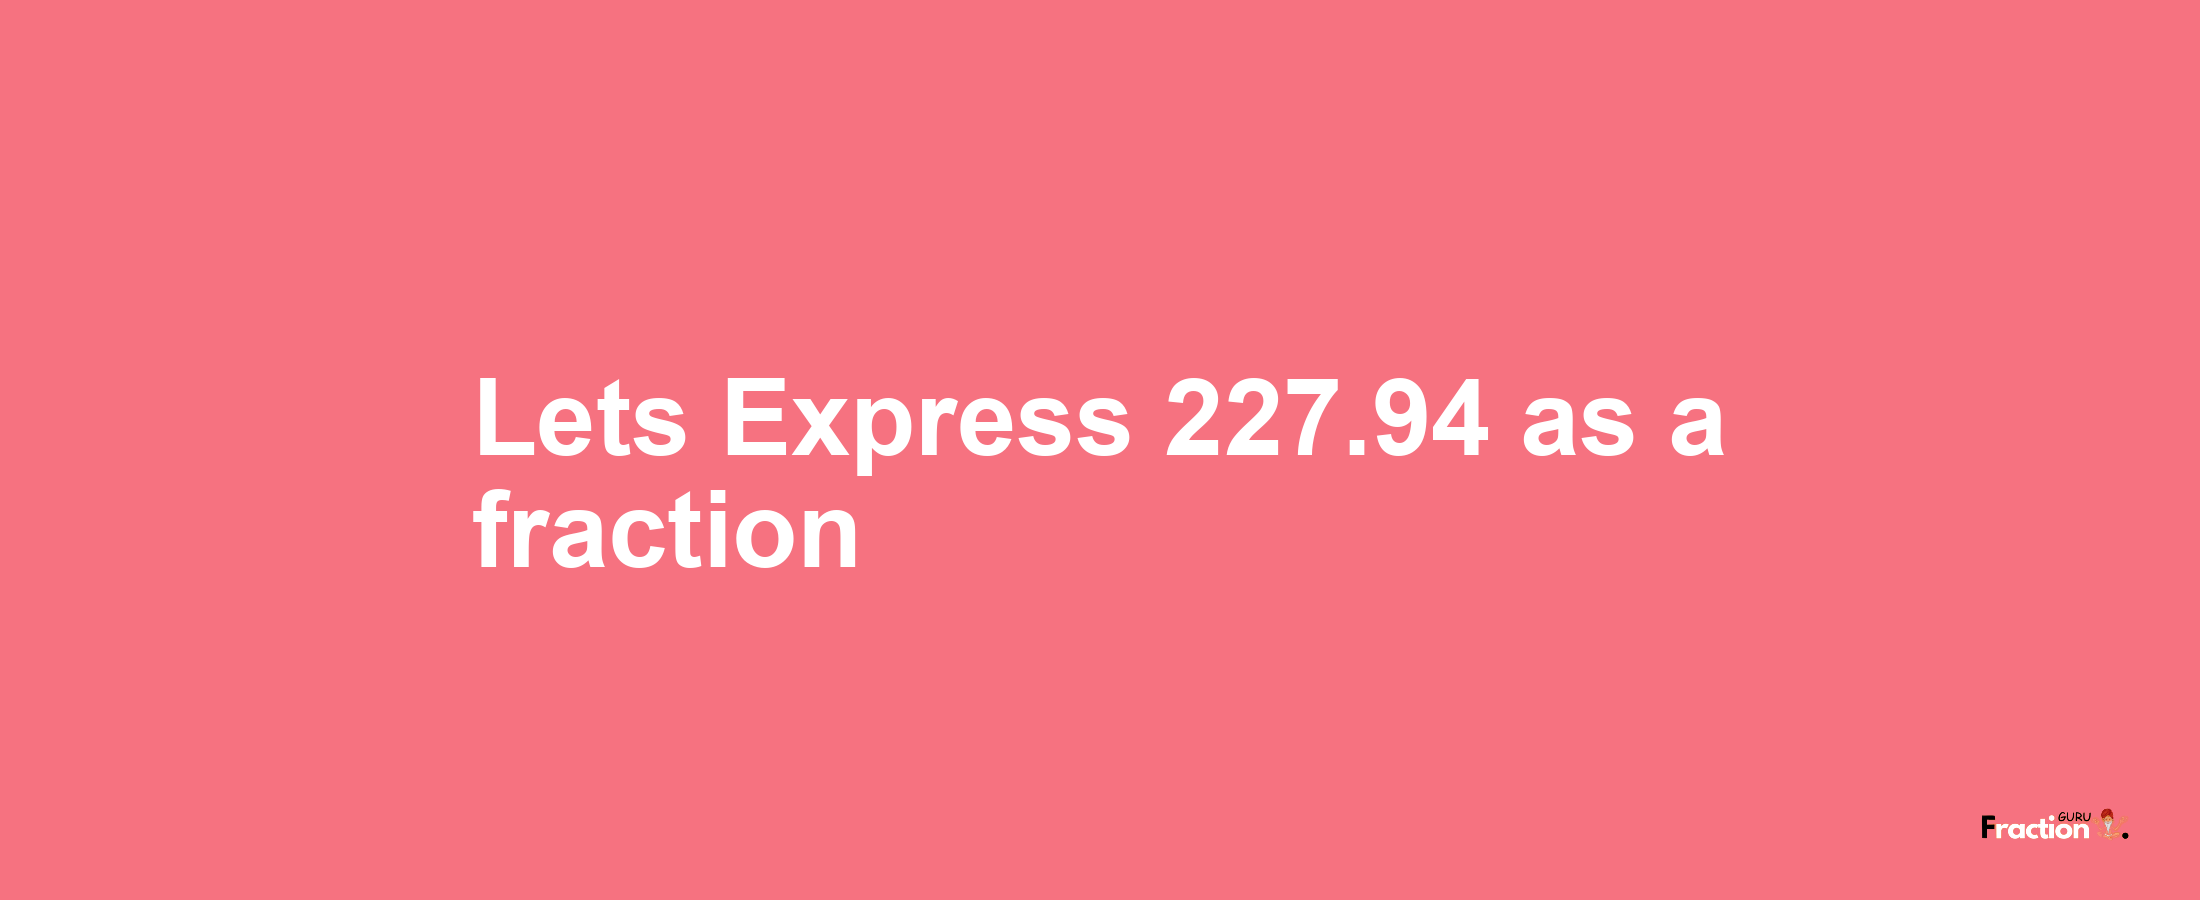 Lets Express 227.94 as afraction